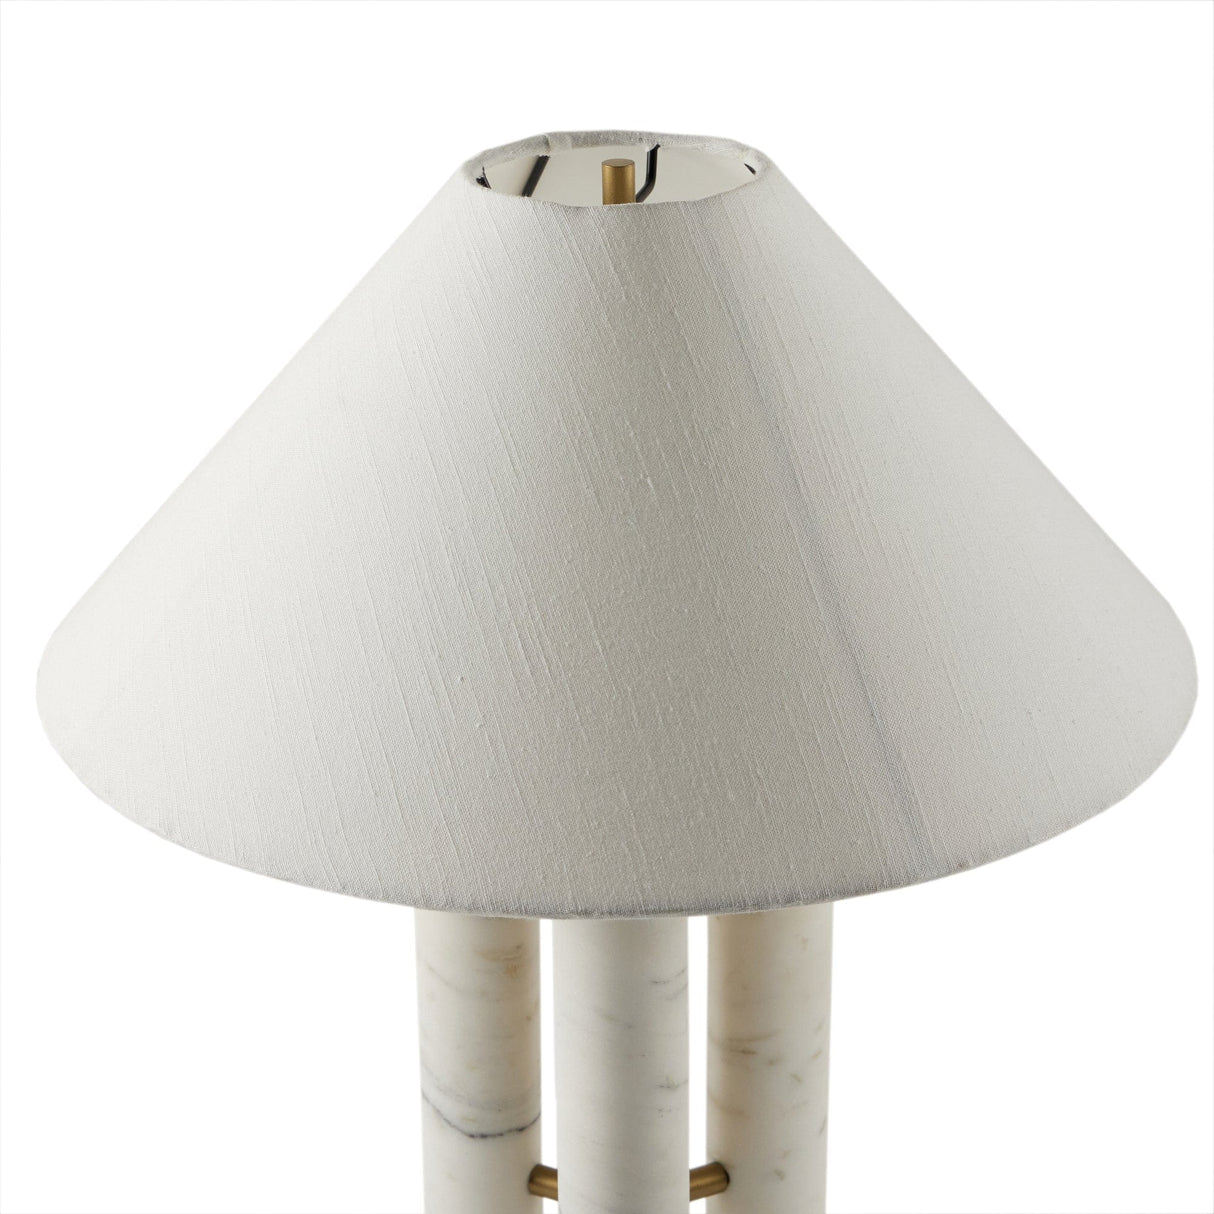 Four Hands Medici Table Lamp Table Lamps four-hands-233066-004 801542138233